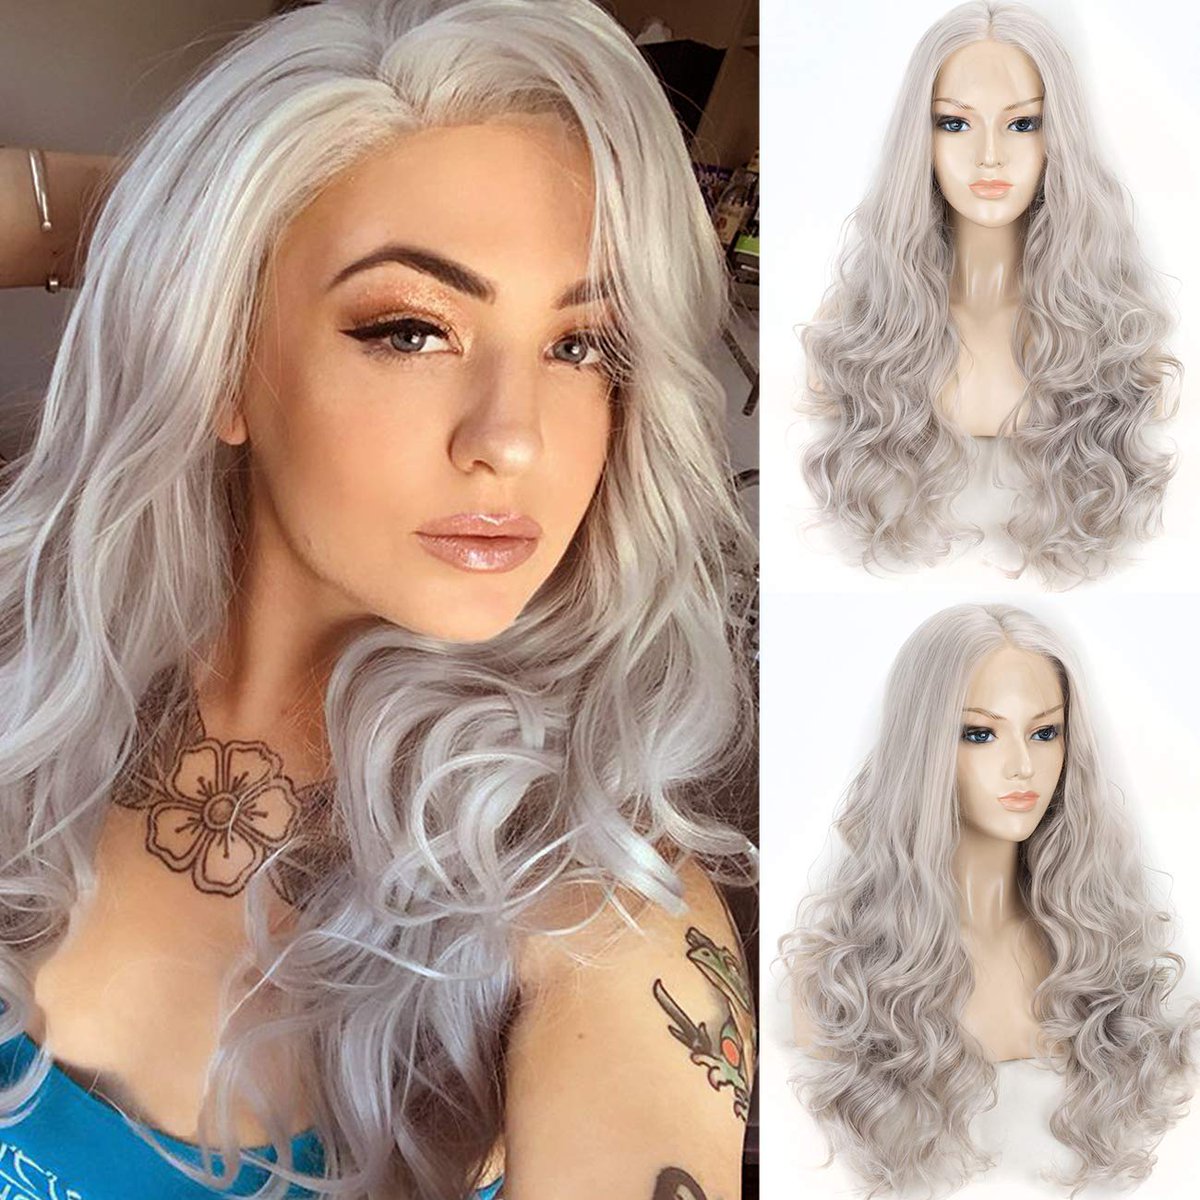 Ordering this wig, which looks light here, but darker in the customer's pics. Worst case scenario I can dye it darker. I've had good luck with this brand before for Zidane so I'm willing to fuss with color. And cut a crapload off, obviously.